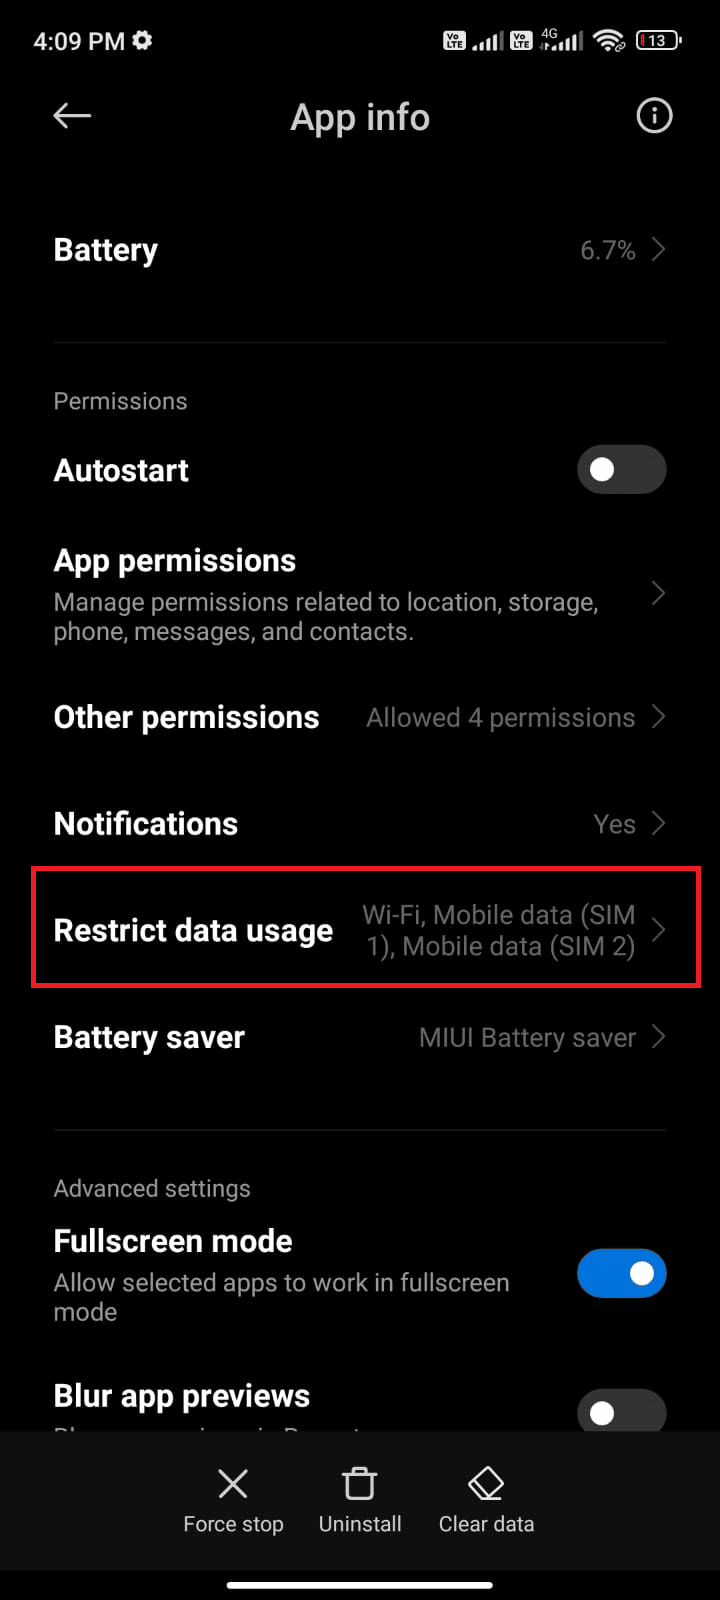 tap on Restricted data usage